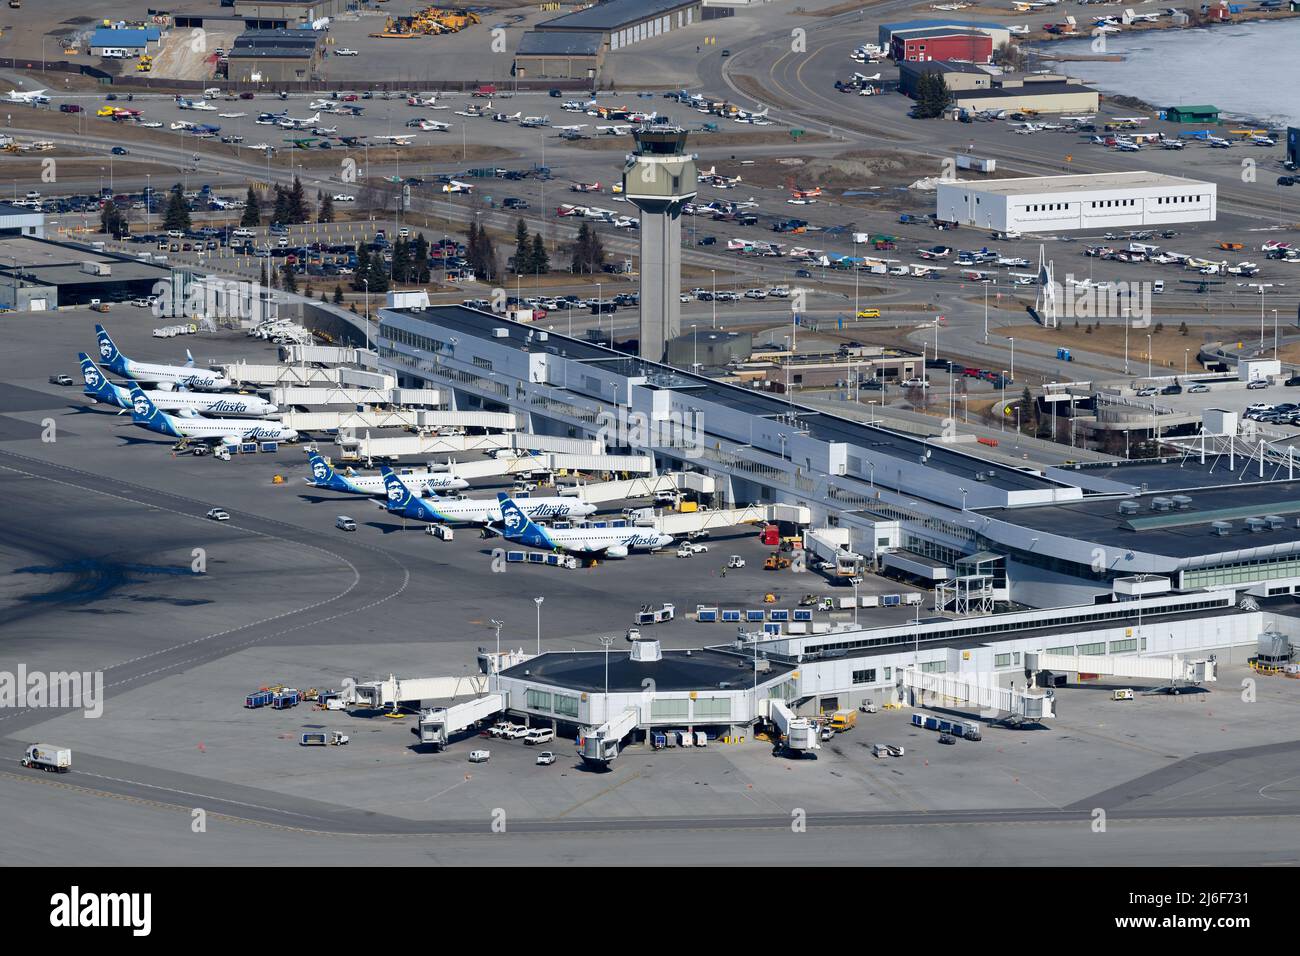 Ted Stevens Anchorage International Airport passengers terminal in Alaska. Multiple airplanes of Alaska Airlines together at Anchorage Airport. Stock Photo